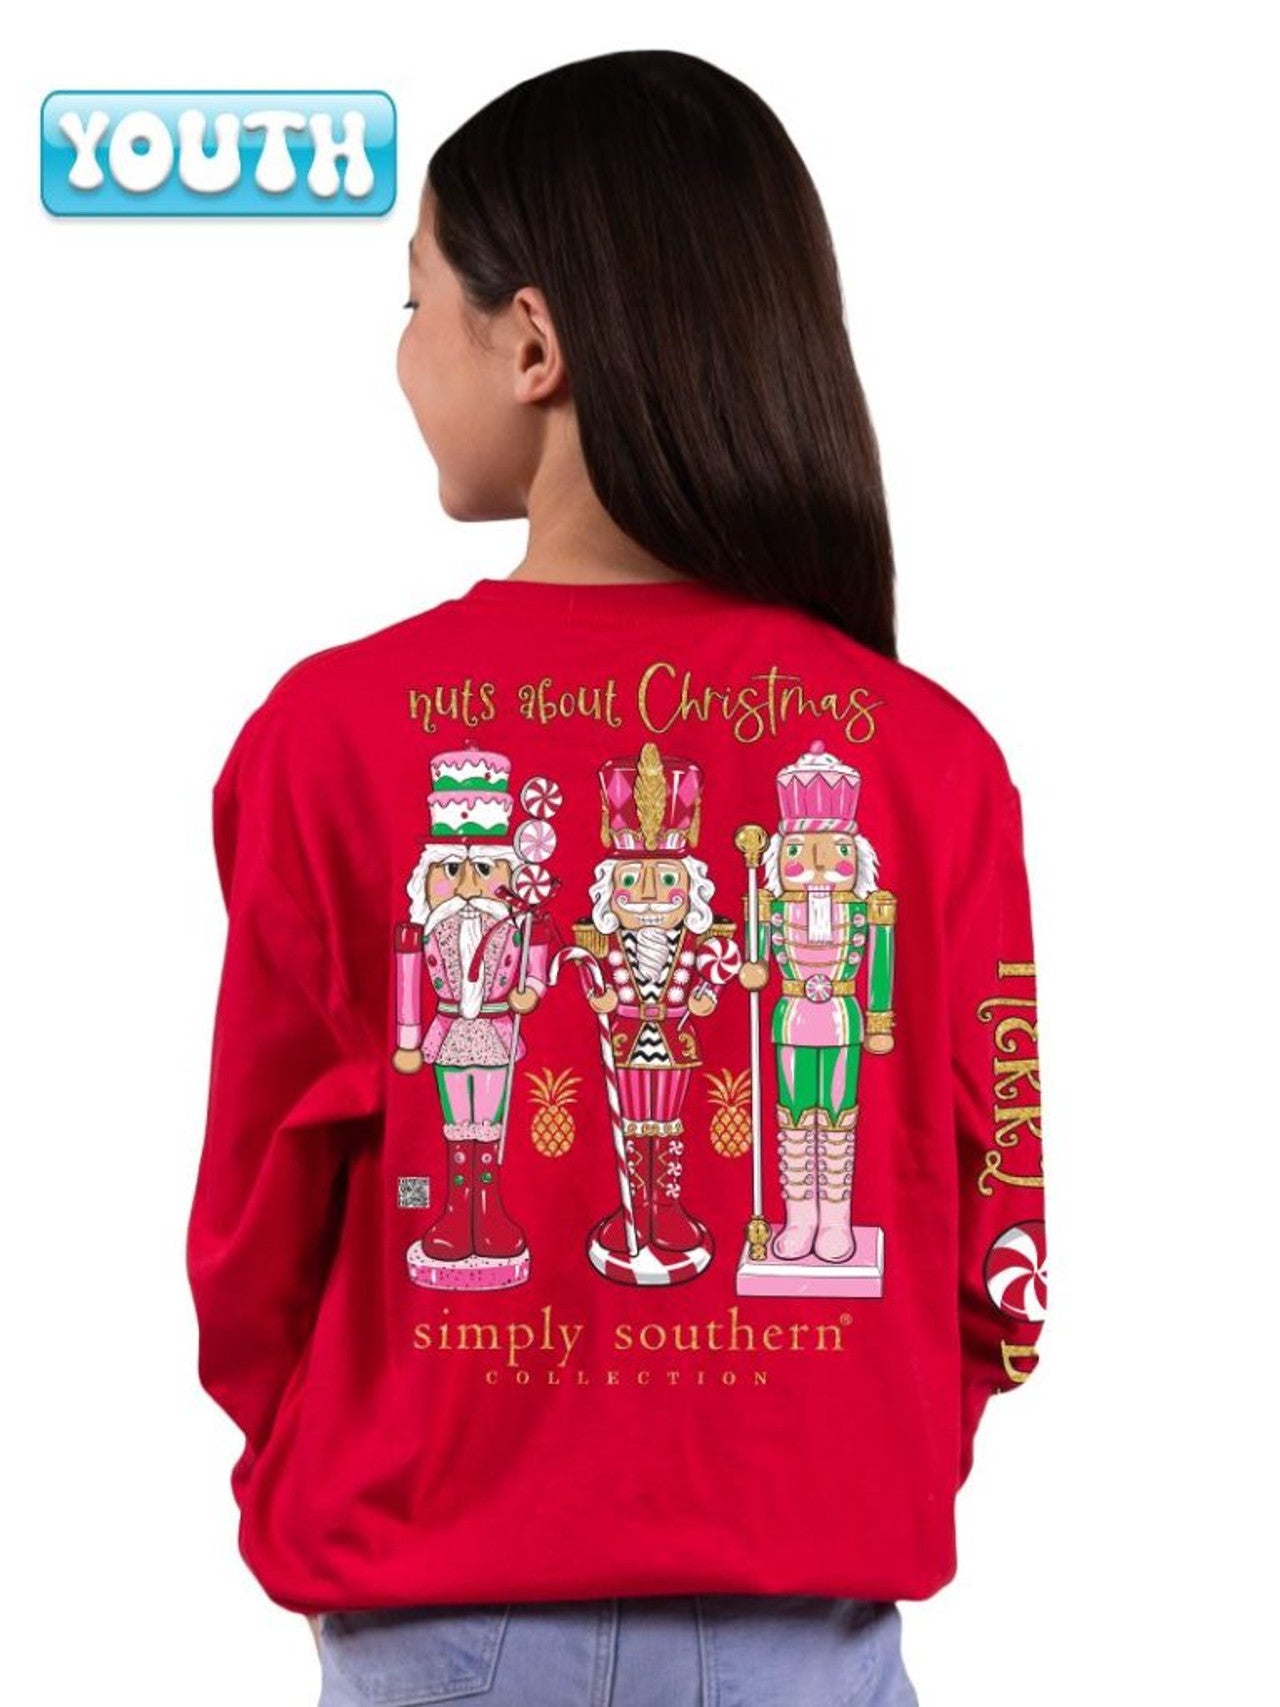 FINAL SALE - YOUTH - Simply Southern - Nuts About Christmas Long Sleeve Tee